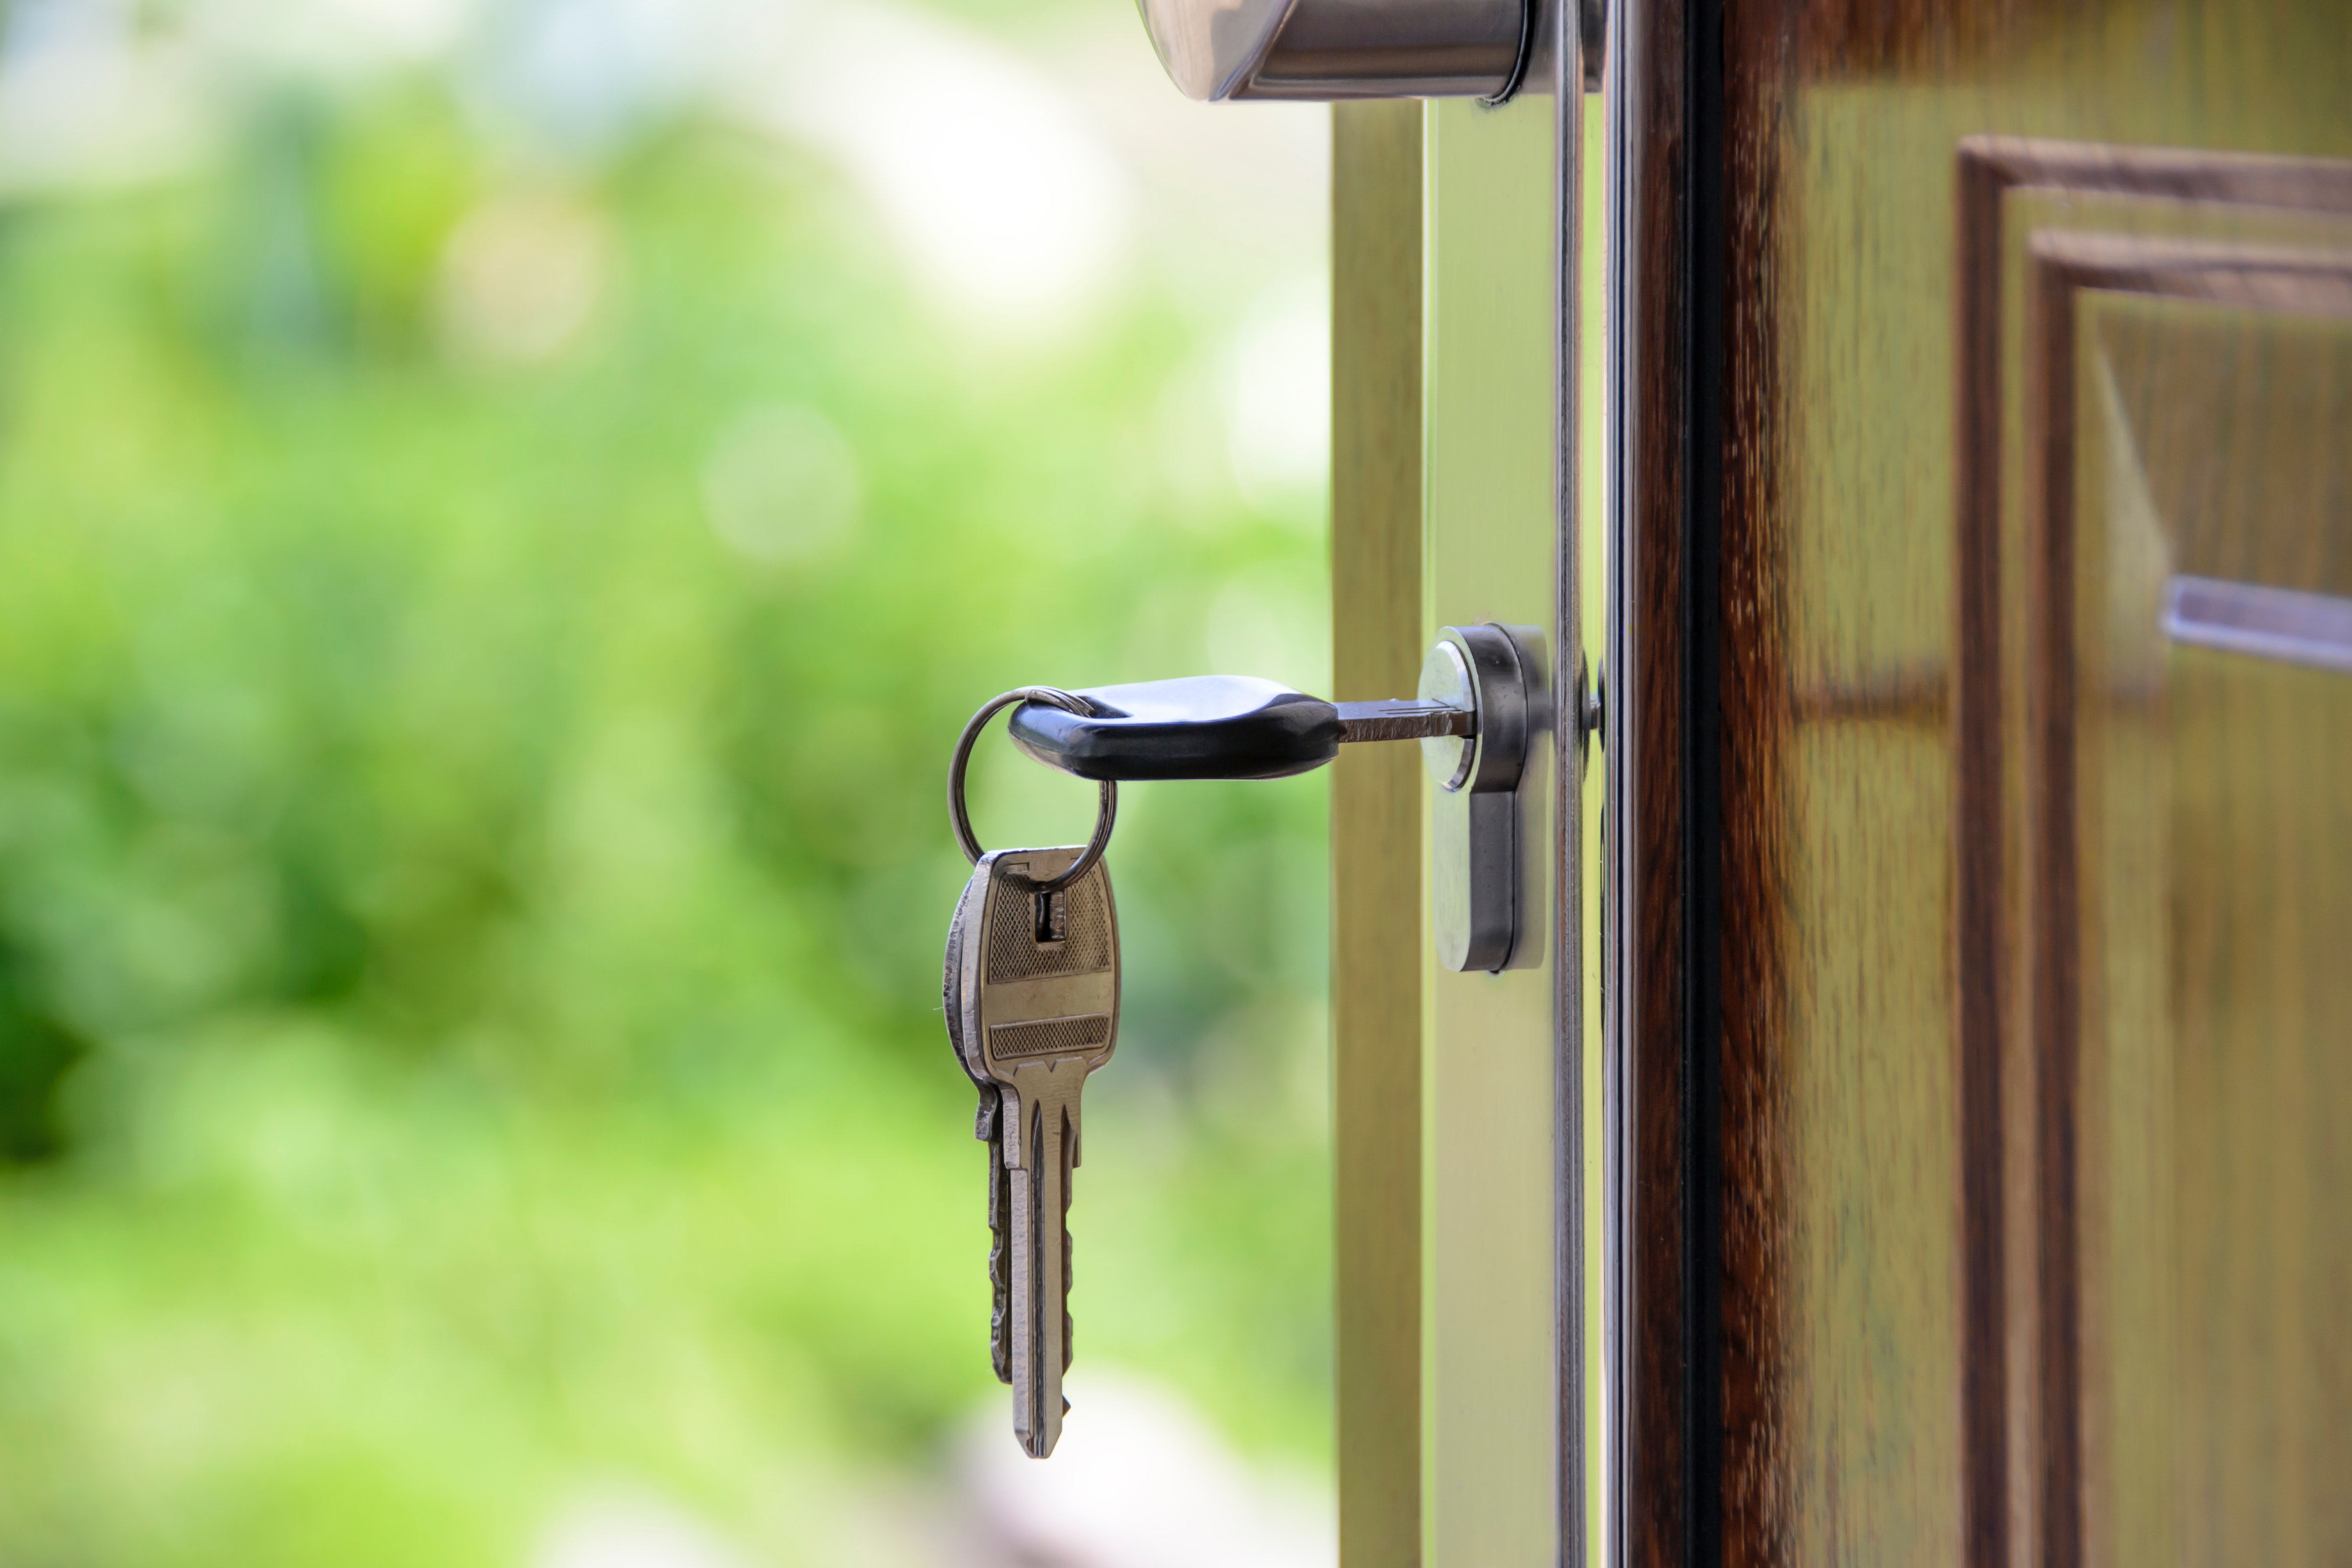 Providing property to family rent free – is there a liability?